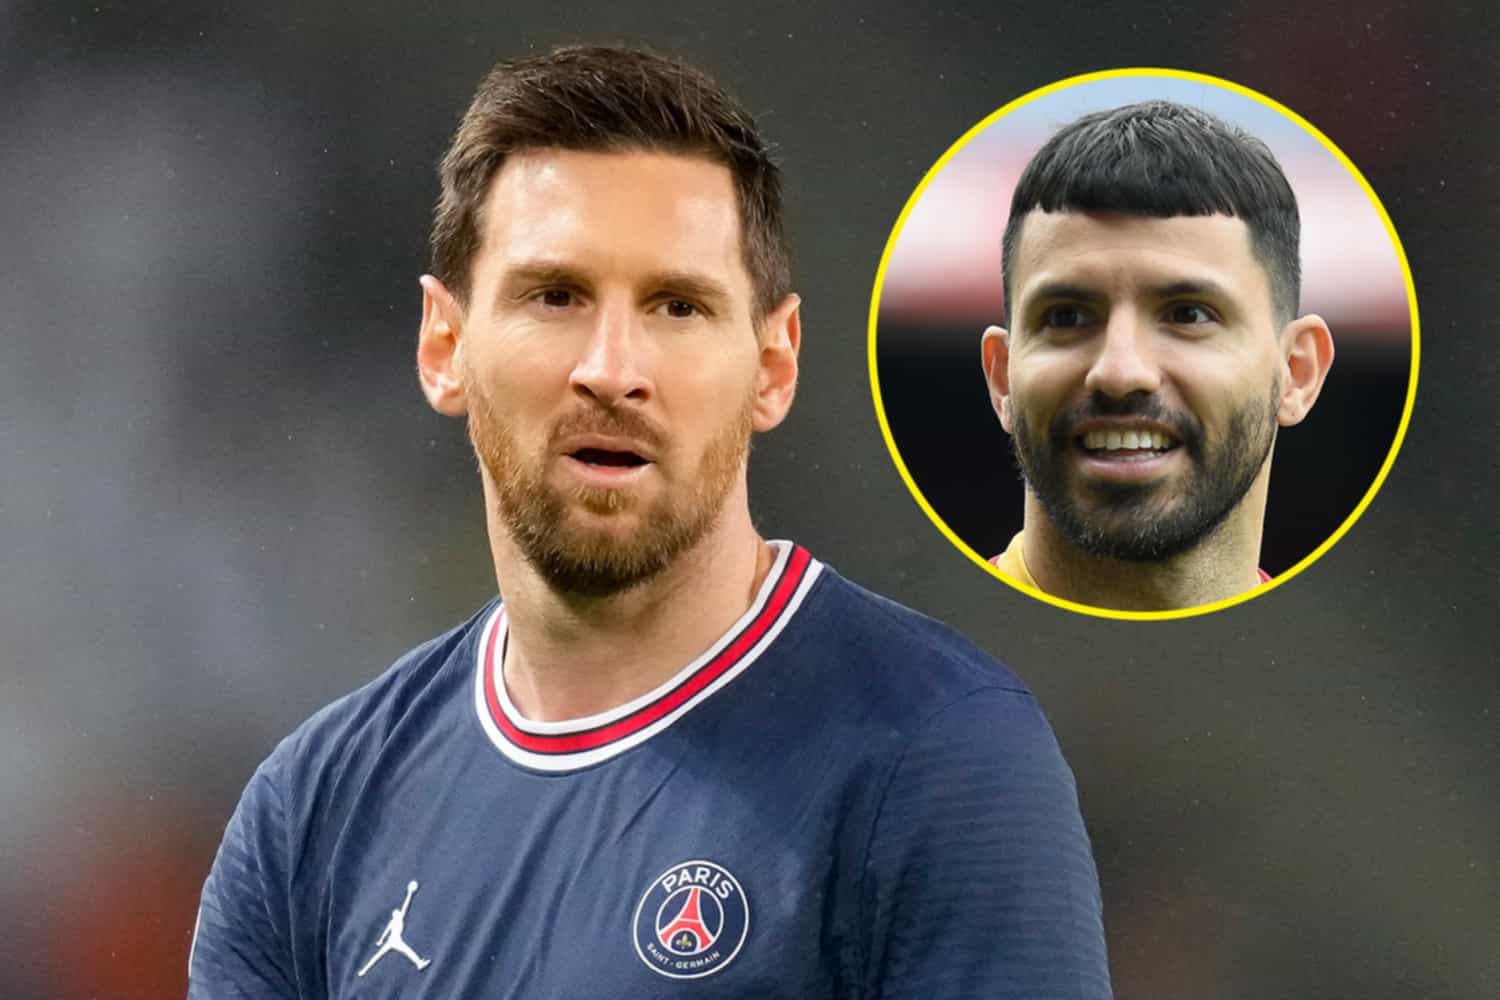 Former Man City striker Sergio Aguero thought Barcelona’s social media account had been hacked when announced Lionel Messi was leaving for Paris Saint-Germain